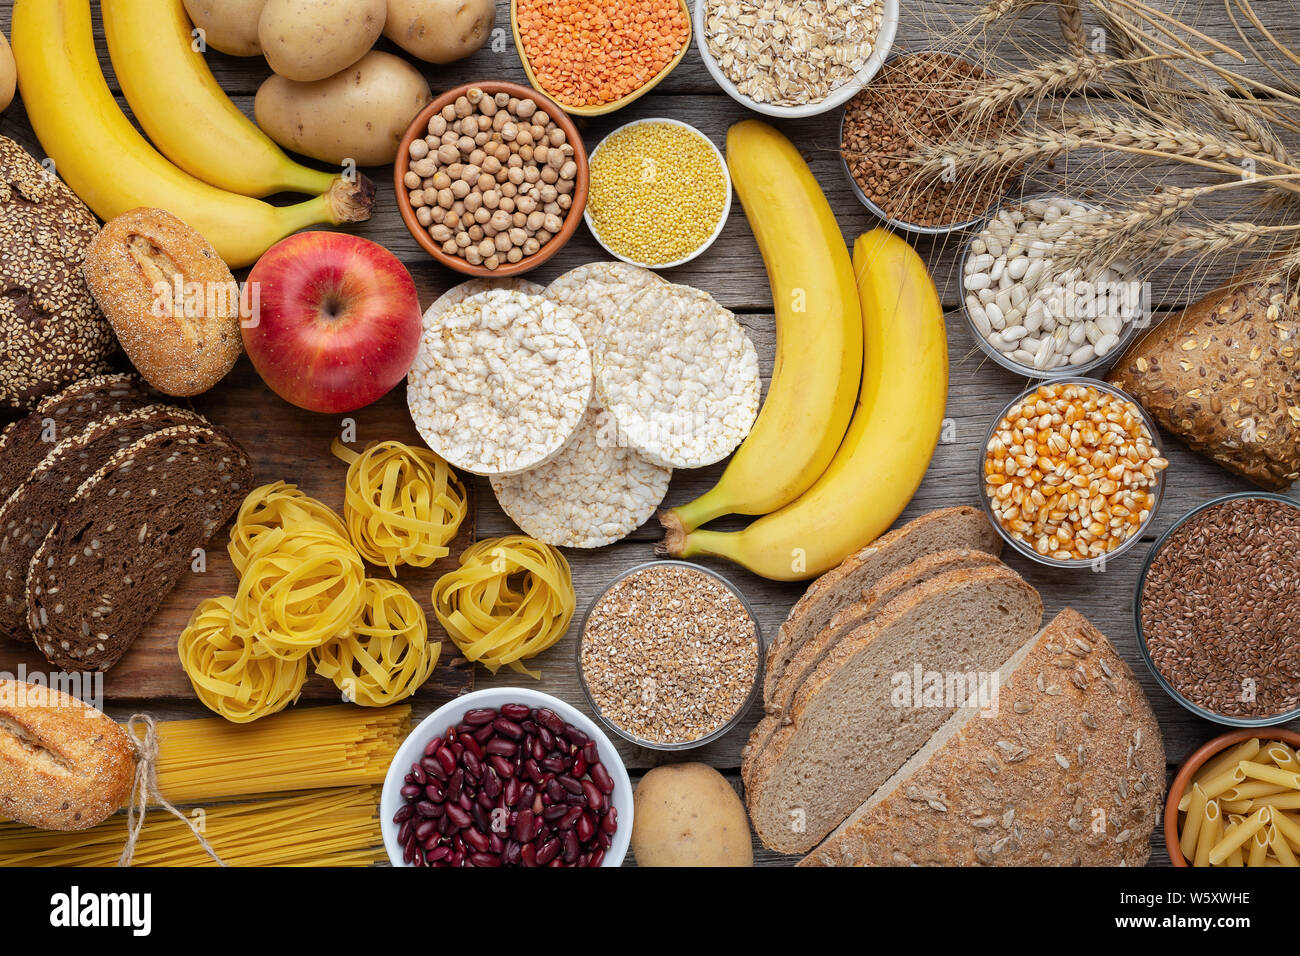 Rich on carbohydrates food with wholegrain bread and fruits Stock Photo